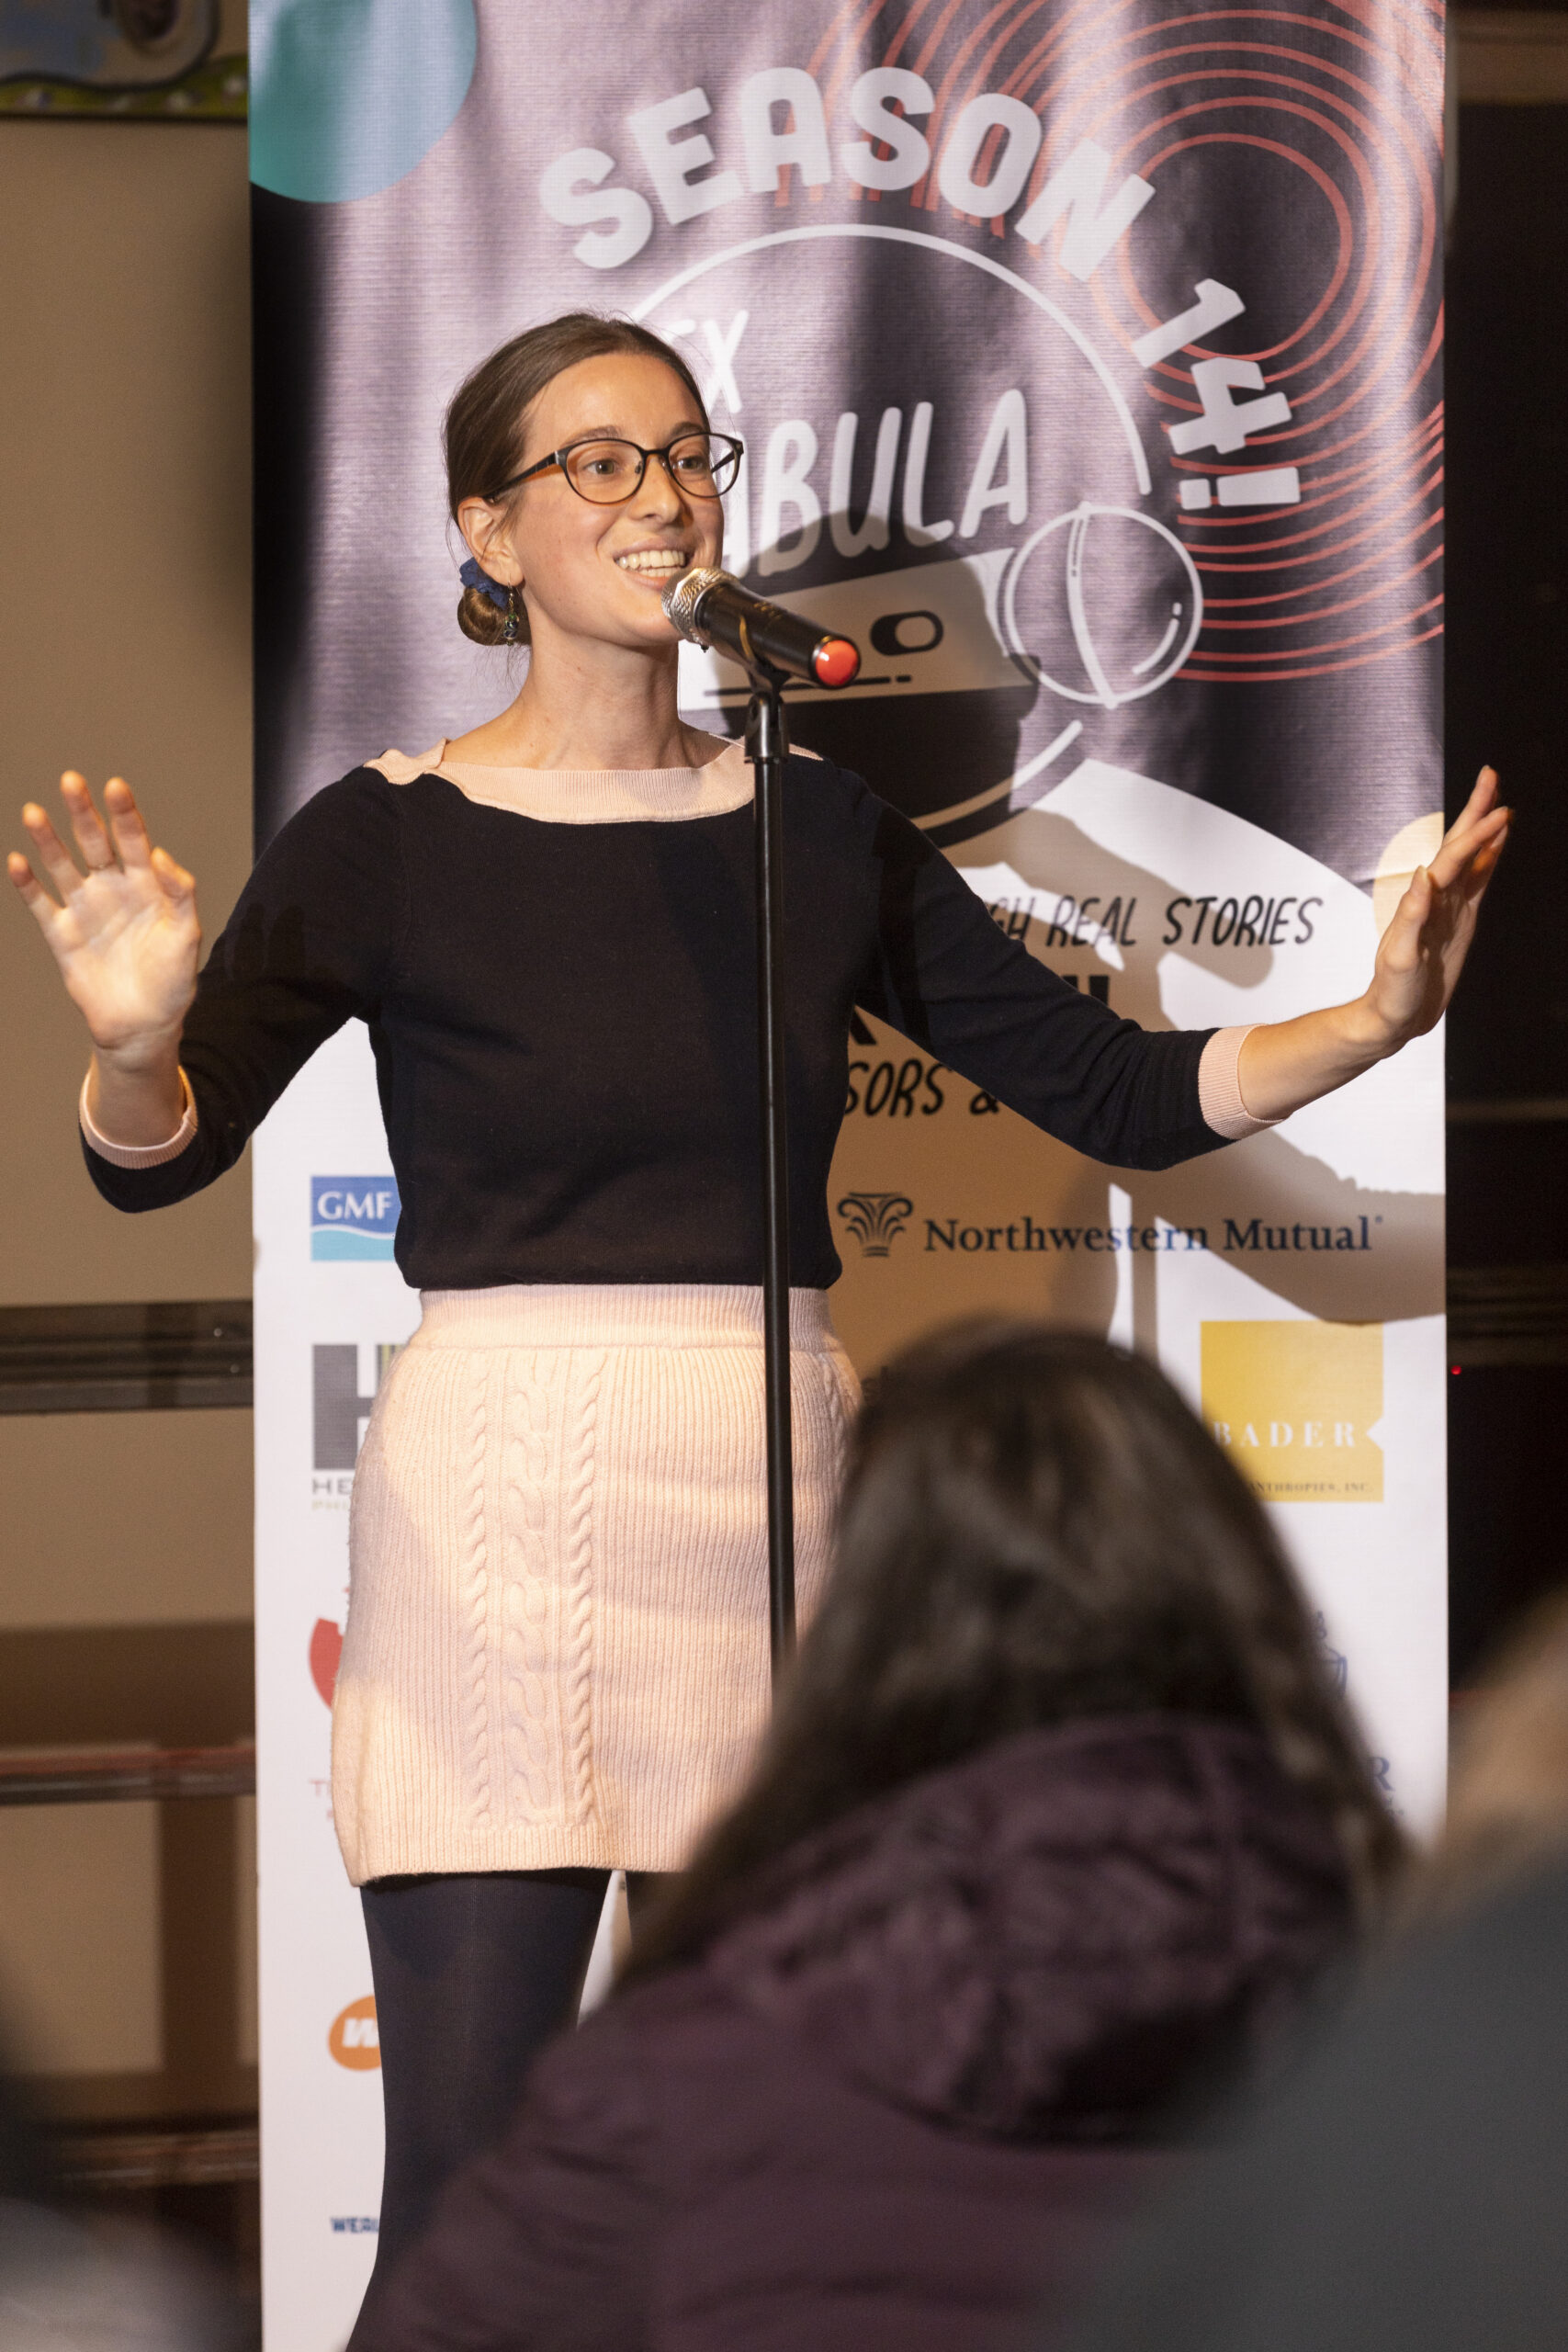 Anya, a white woman with her hair pulled into a low bun is wearing a black shirt and pink knit skirt. She holds out her arms and speaks into microphone